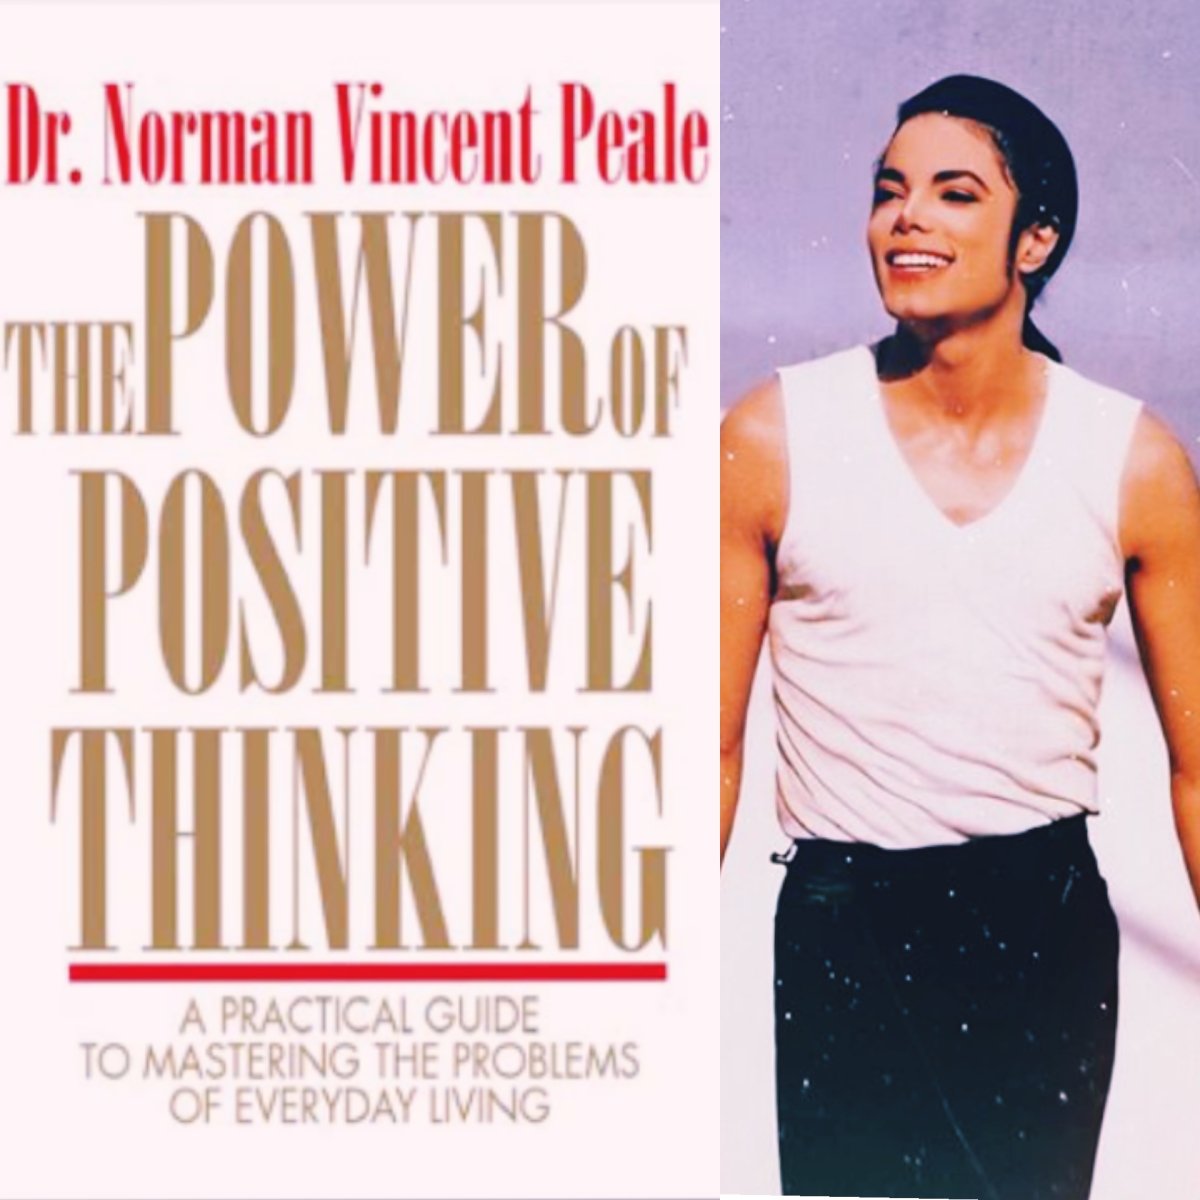 Michael Jackson and The Power Of Positive Thinking – Dr. Norman Vincent Peale – 1952.